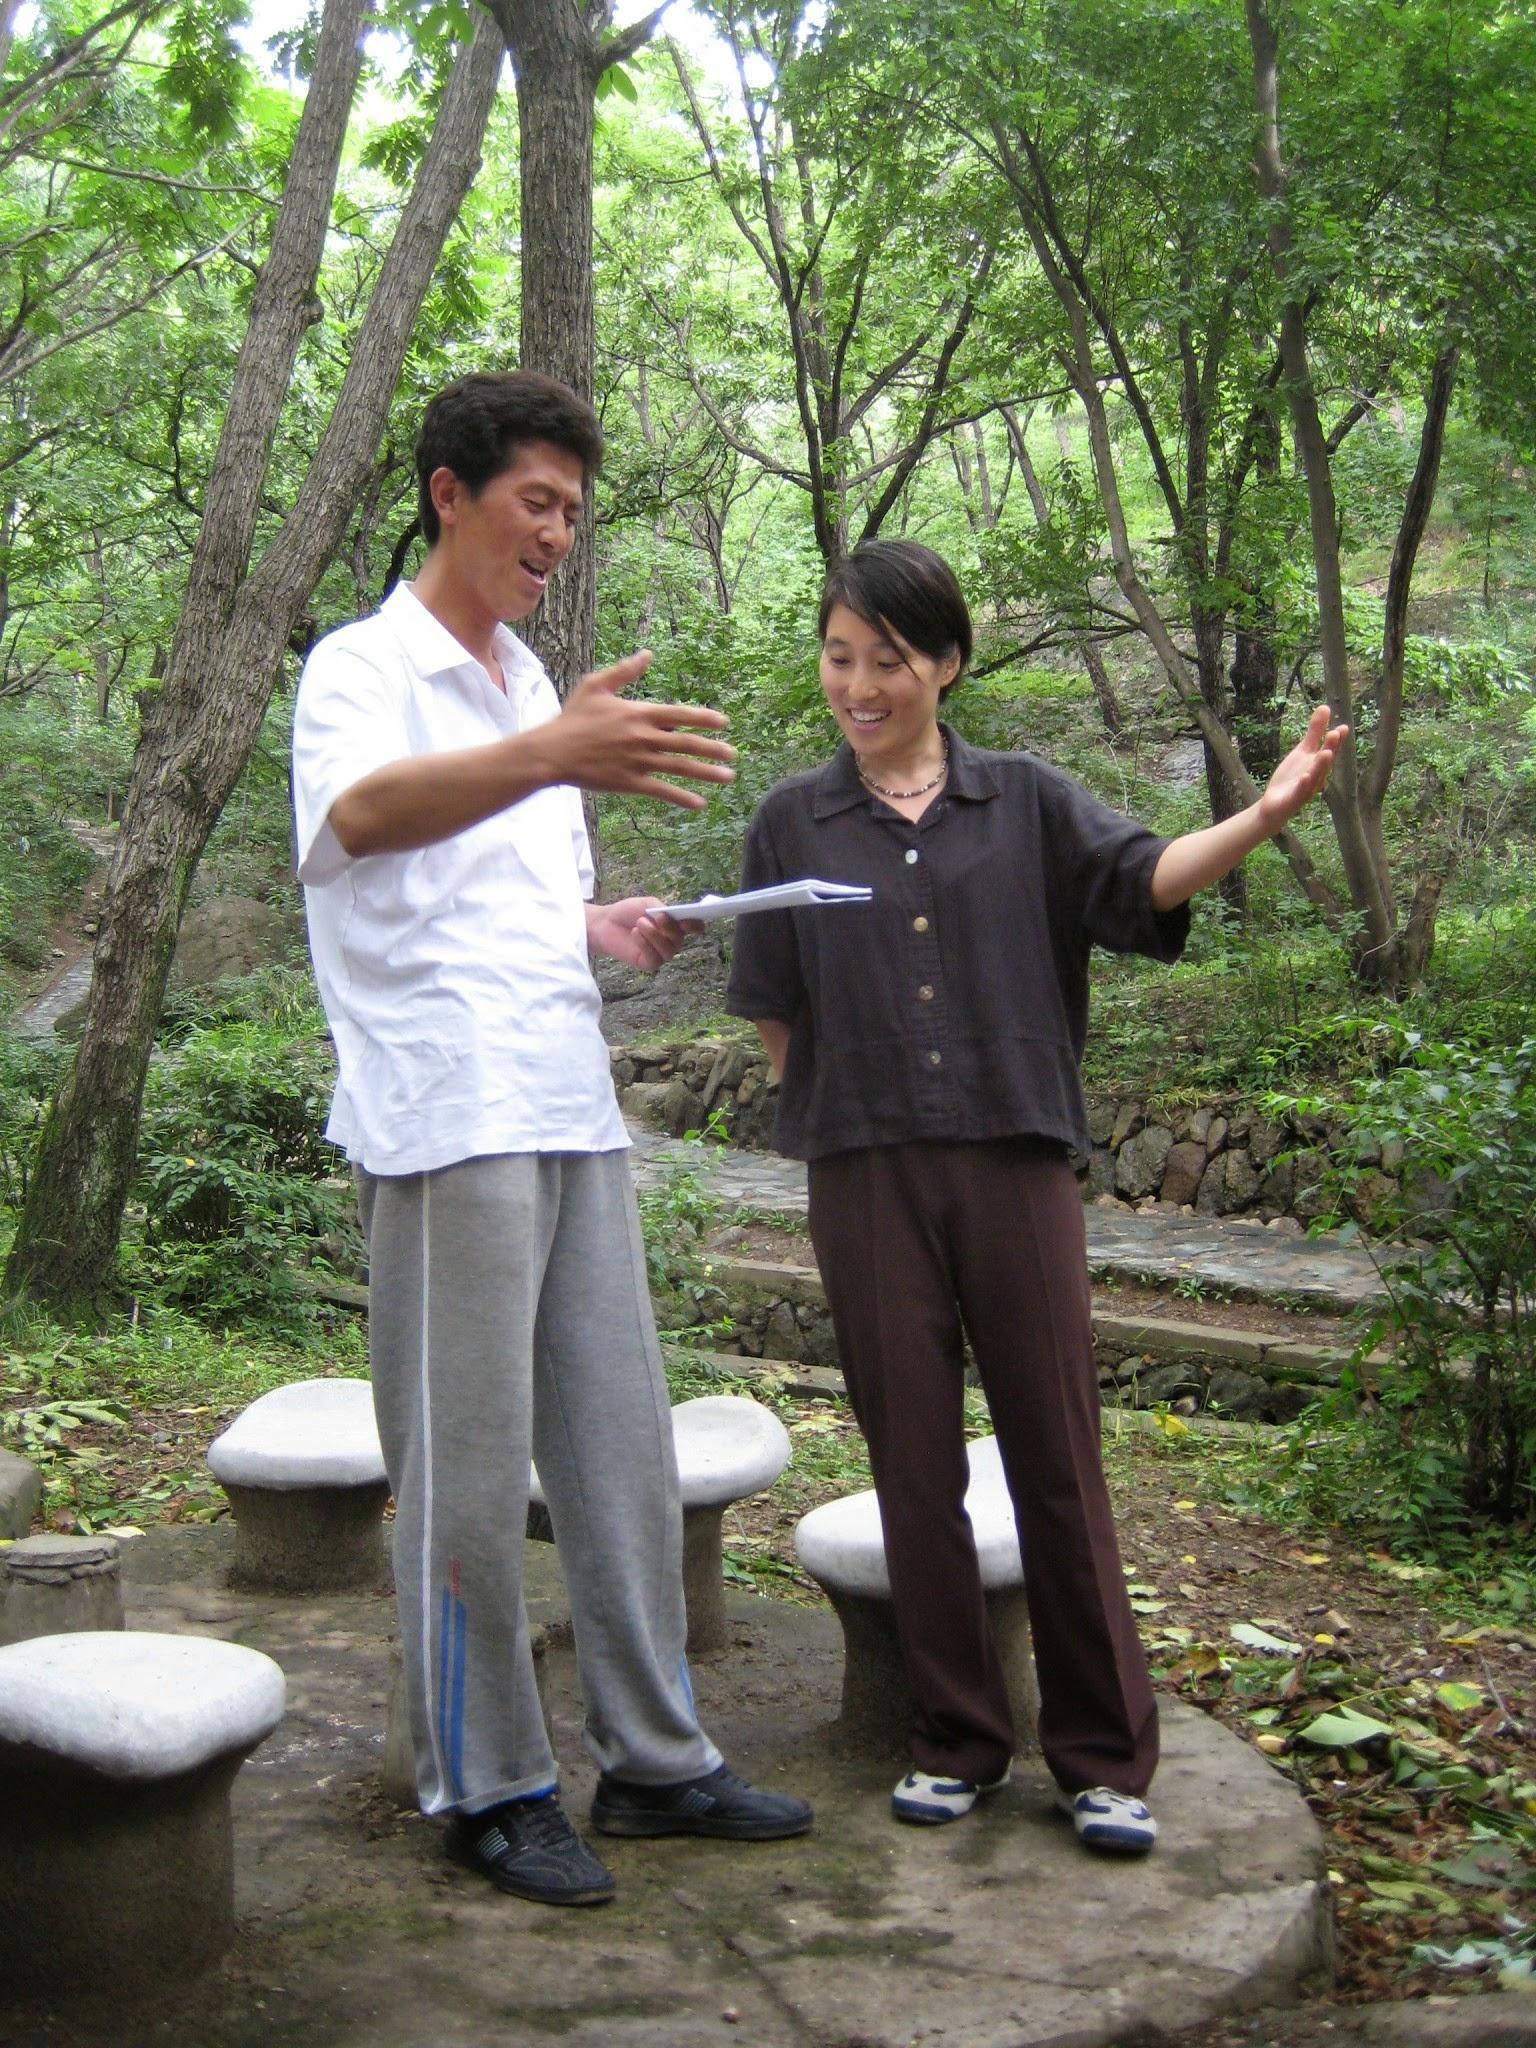 Hyun and a man singing in the woods in the mountains with their arms out in emphasis. They are smiling.